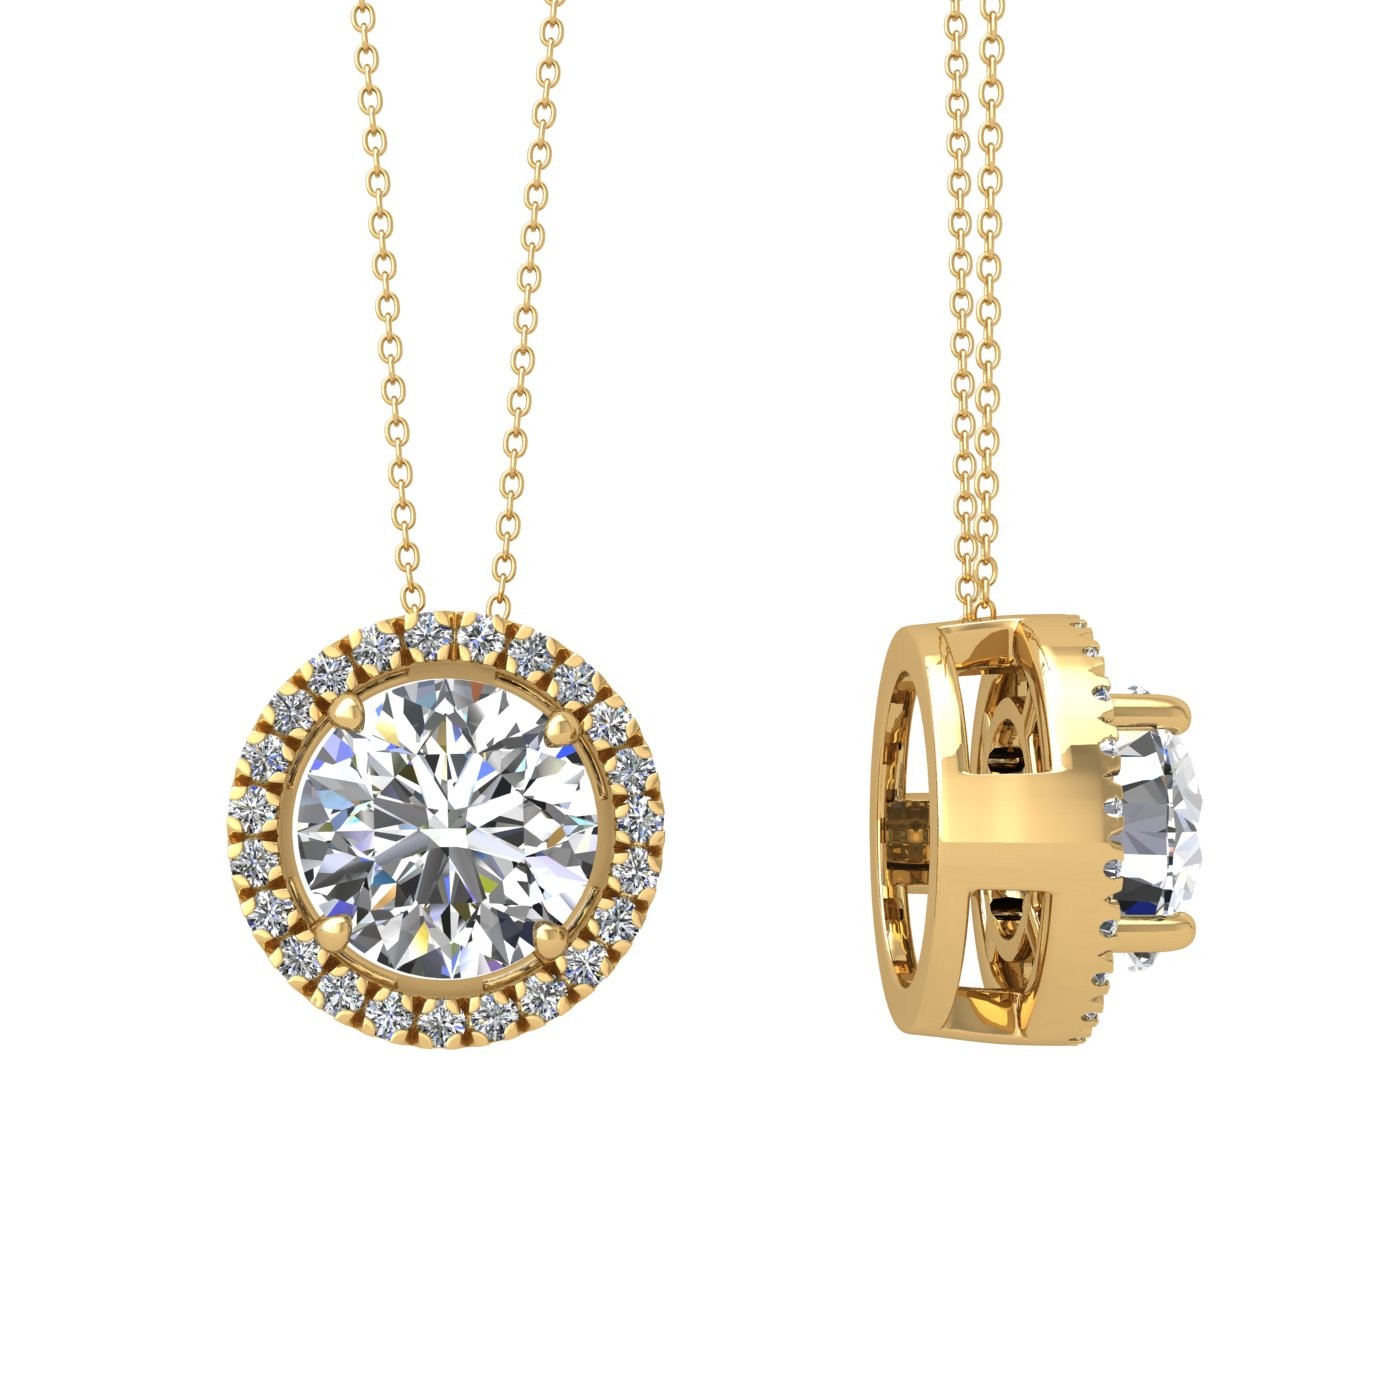 18k yellow gold 2,5 ct 4 prong round shape diamond pendant with diamond pavÉ set halo including chain seperate from the pendant Photos & images